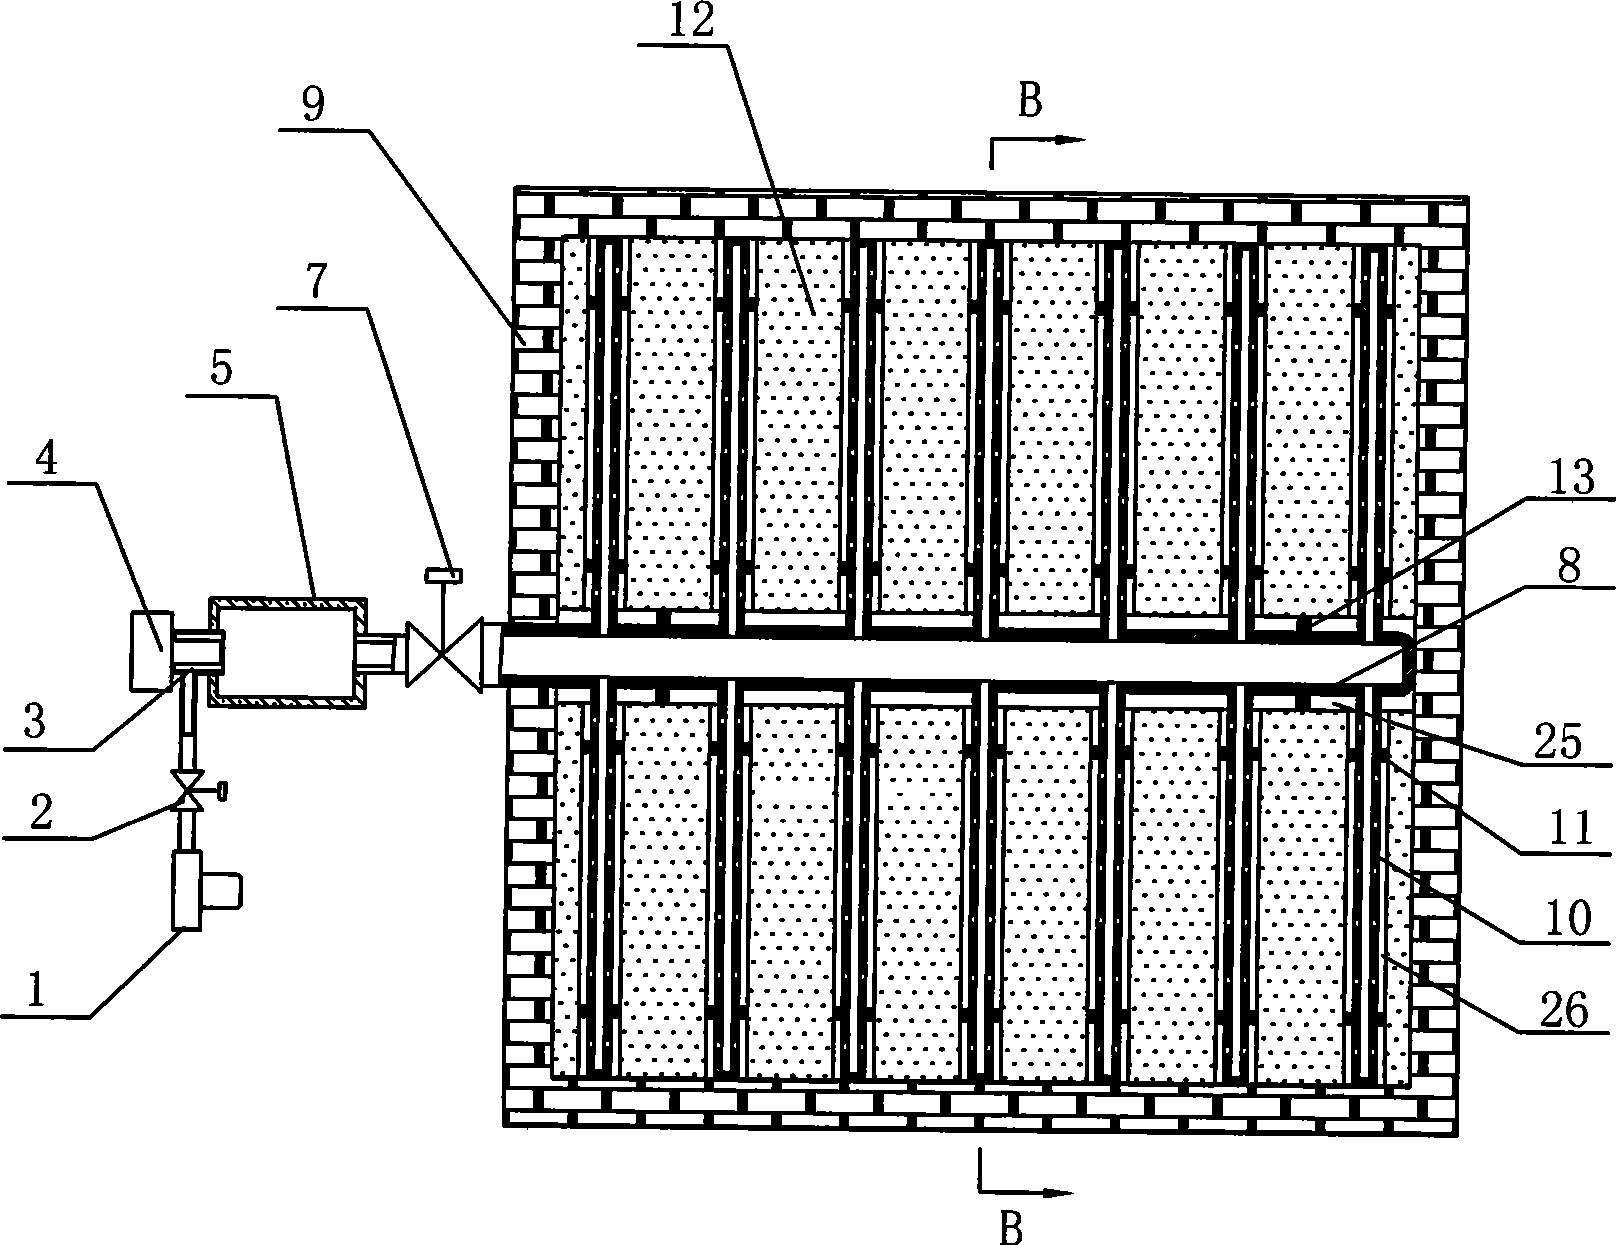 Heating start-up system of mine ventilation air methane oxidized apparatus